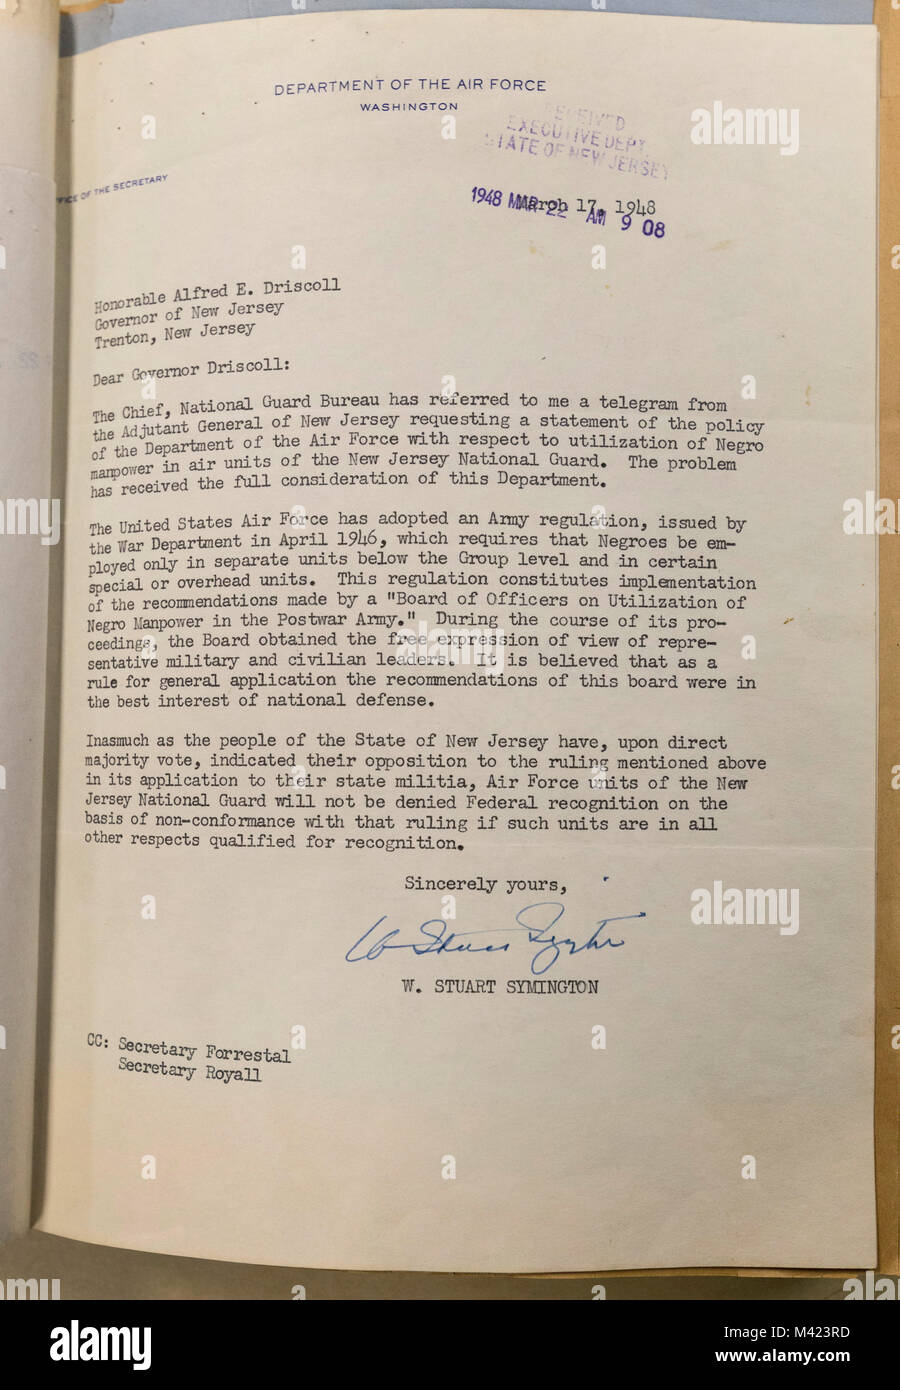 Letter from W. Stuart Symington, Secretary of the Air Force, sent to New Jersey Governor Alfred E. Driscoll on March 17, 1948, authorizing racially mixed units in the New Jersey Air National Guard. This made the New Jersey National Guard the first federally recognized military component to be integrated. (New Jersey National Guard photo by Mark C. Olsen) Stock Photo